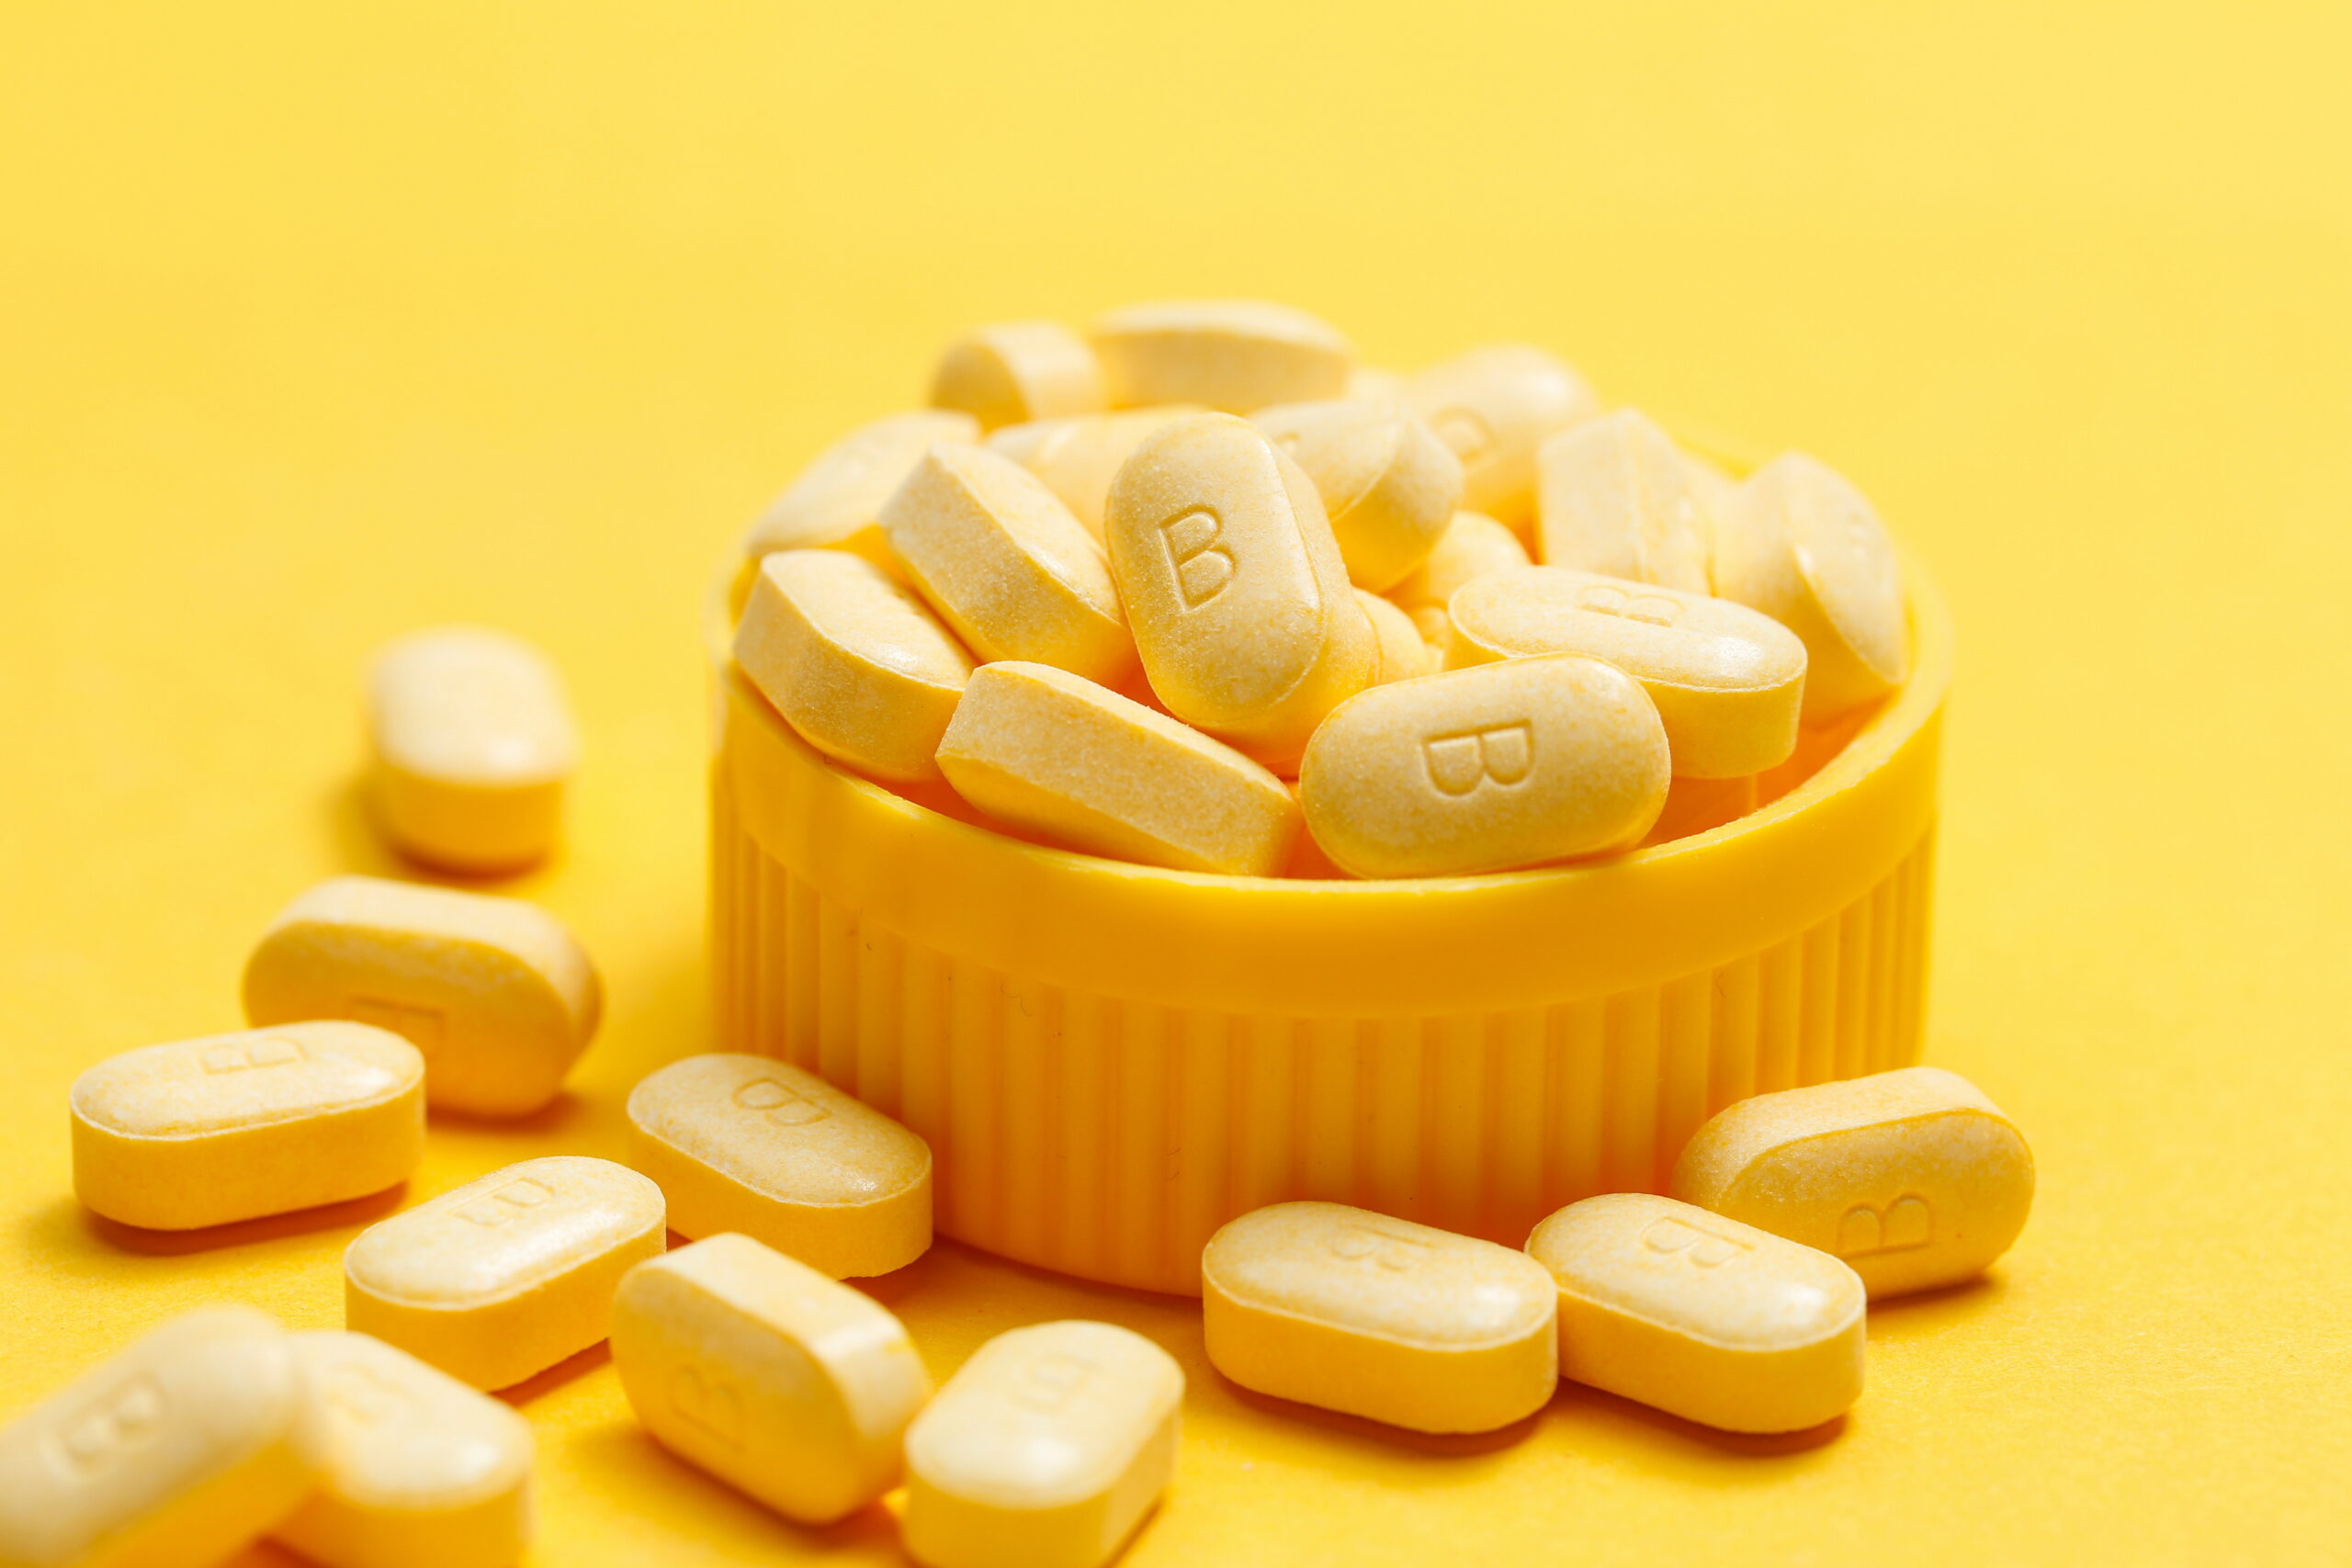 vitamin B tablets contains of Affro B on yellow background